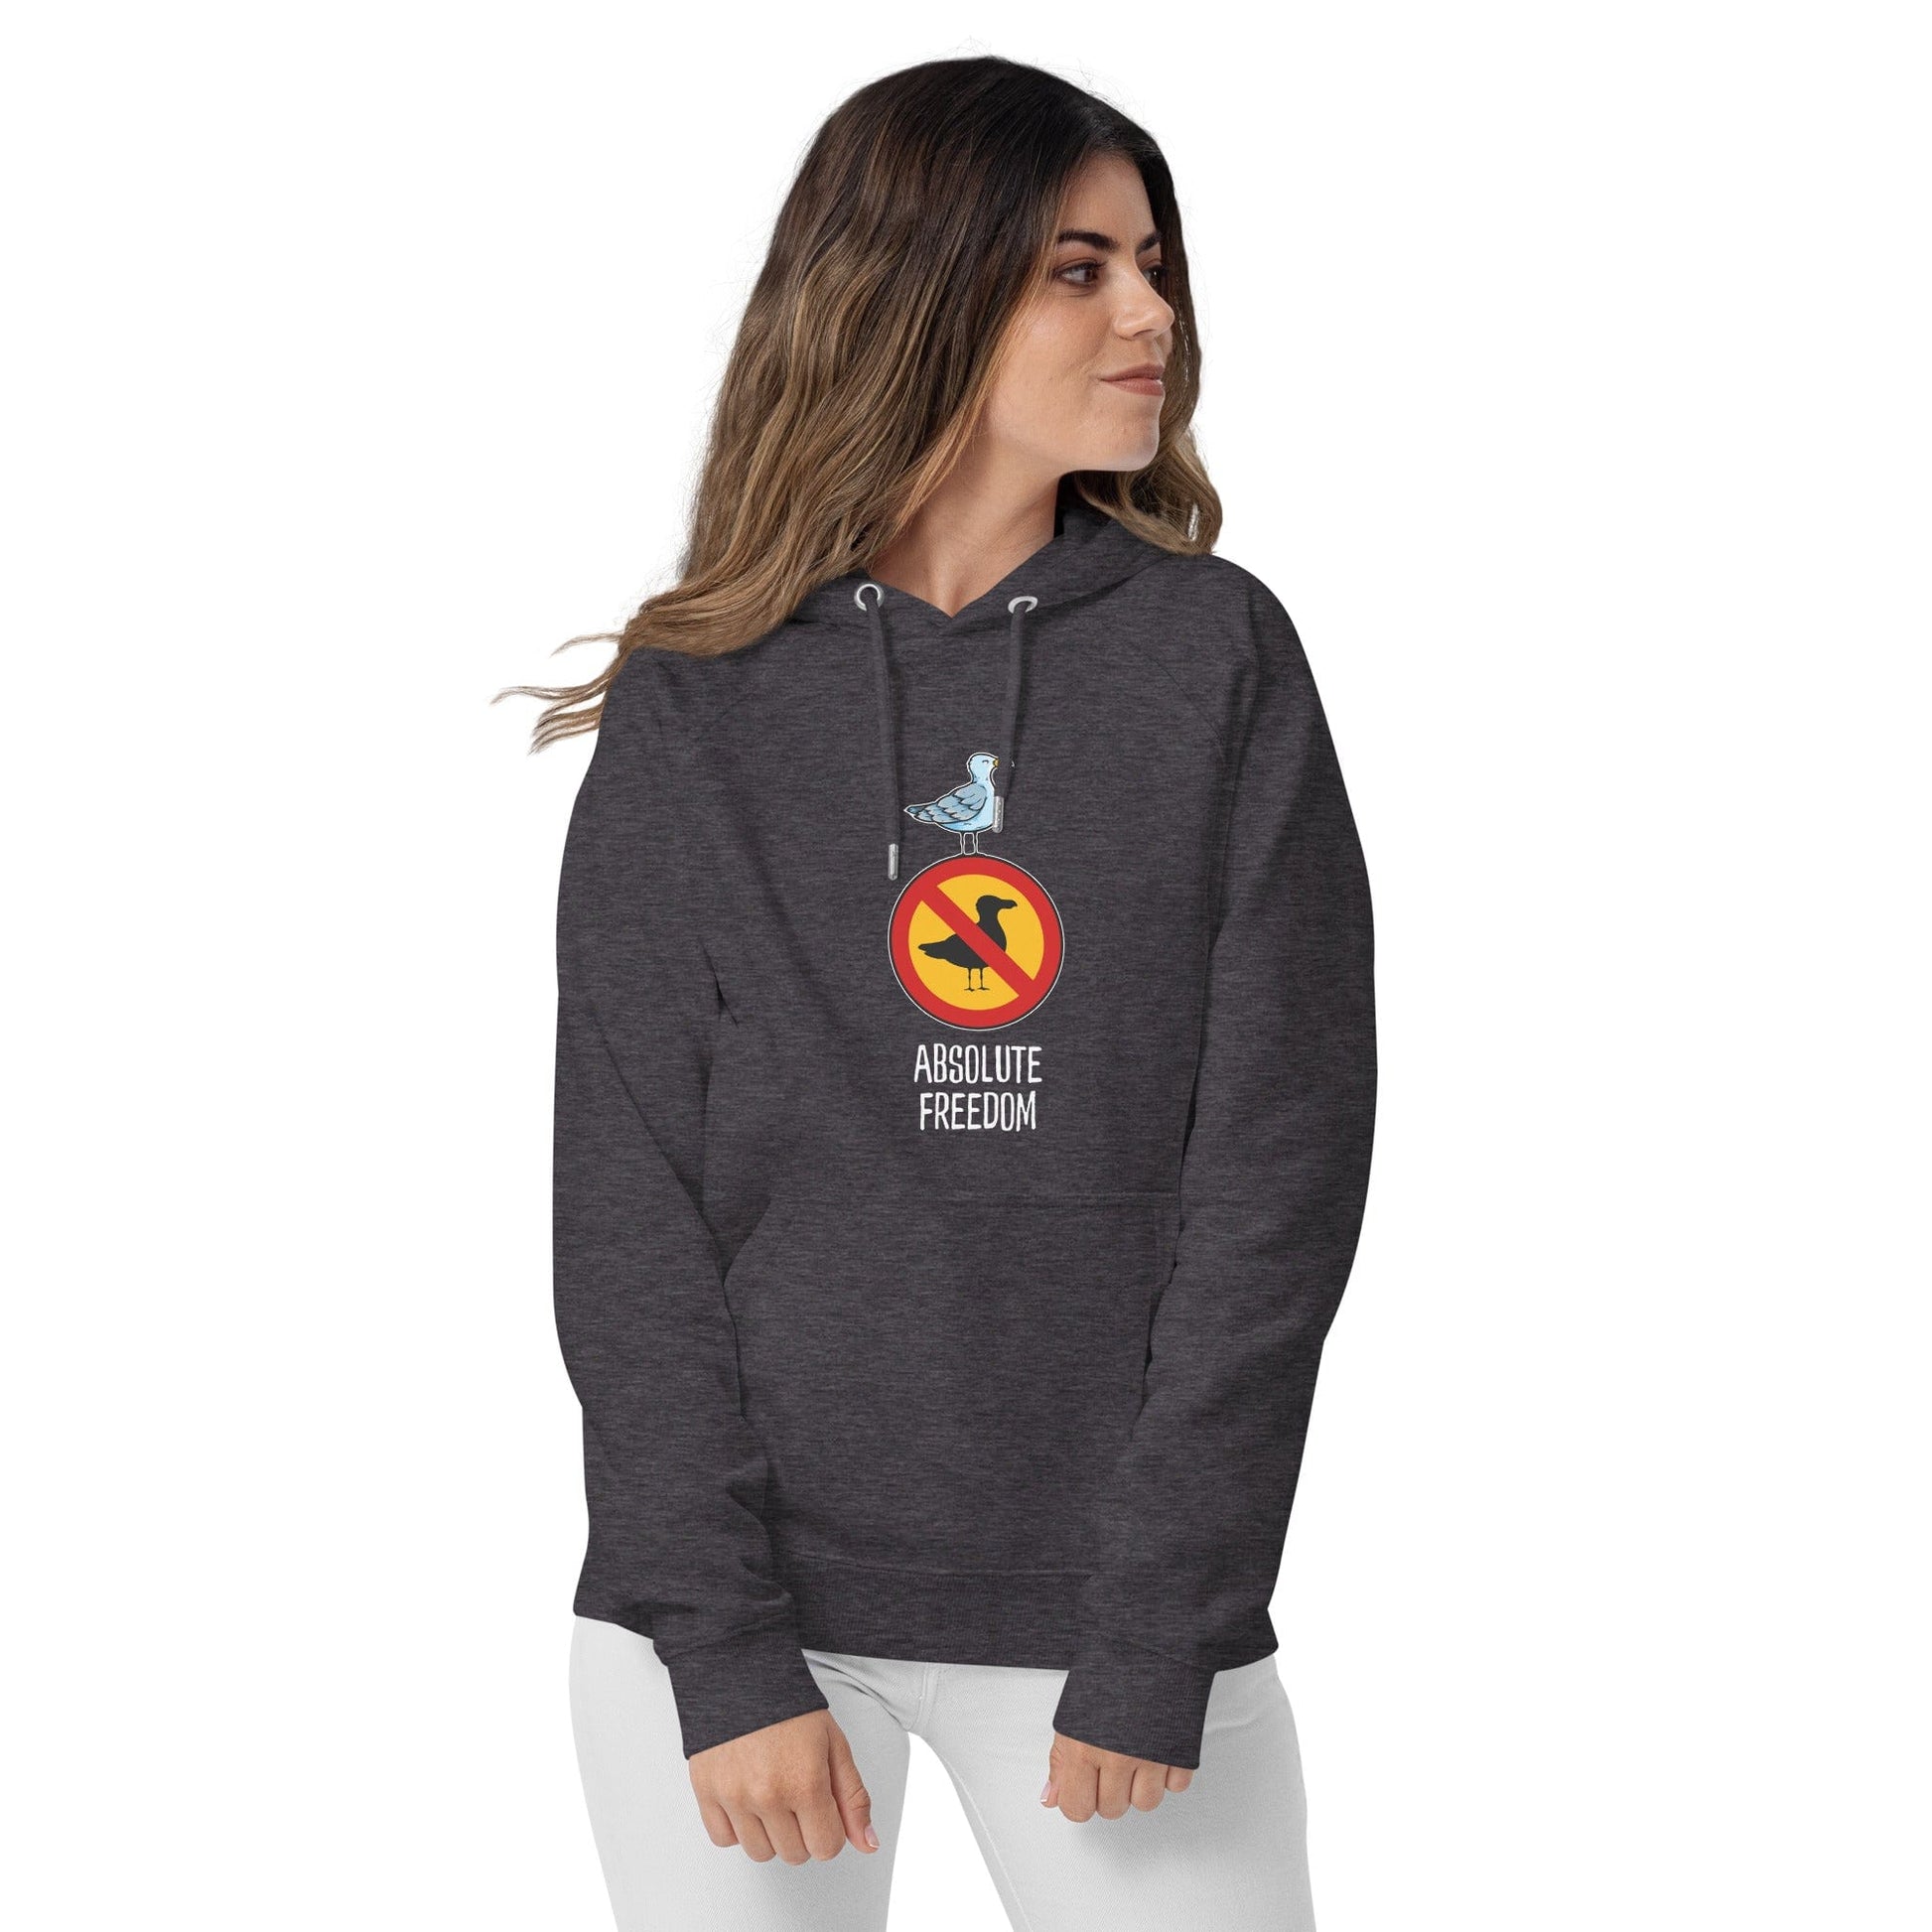 Sartre - Absolute Freedom Seagull - Eco Hoodie